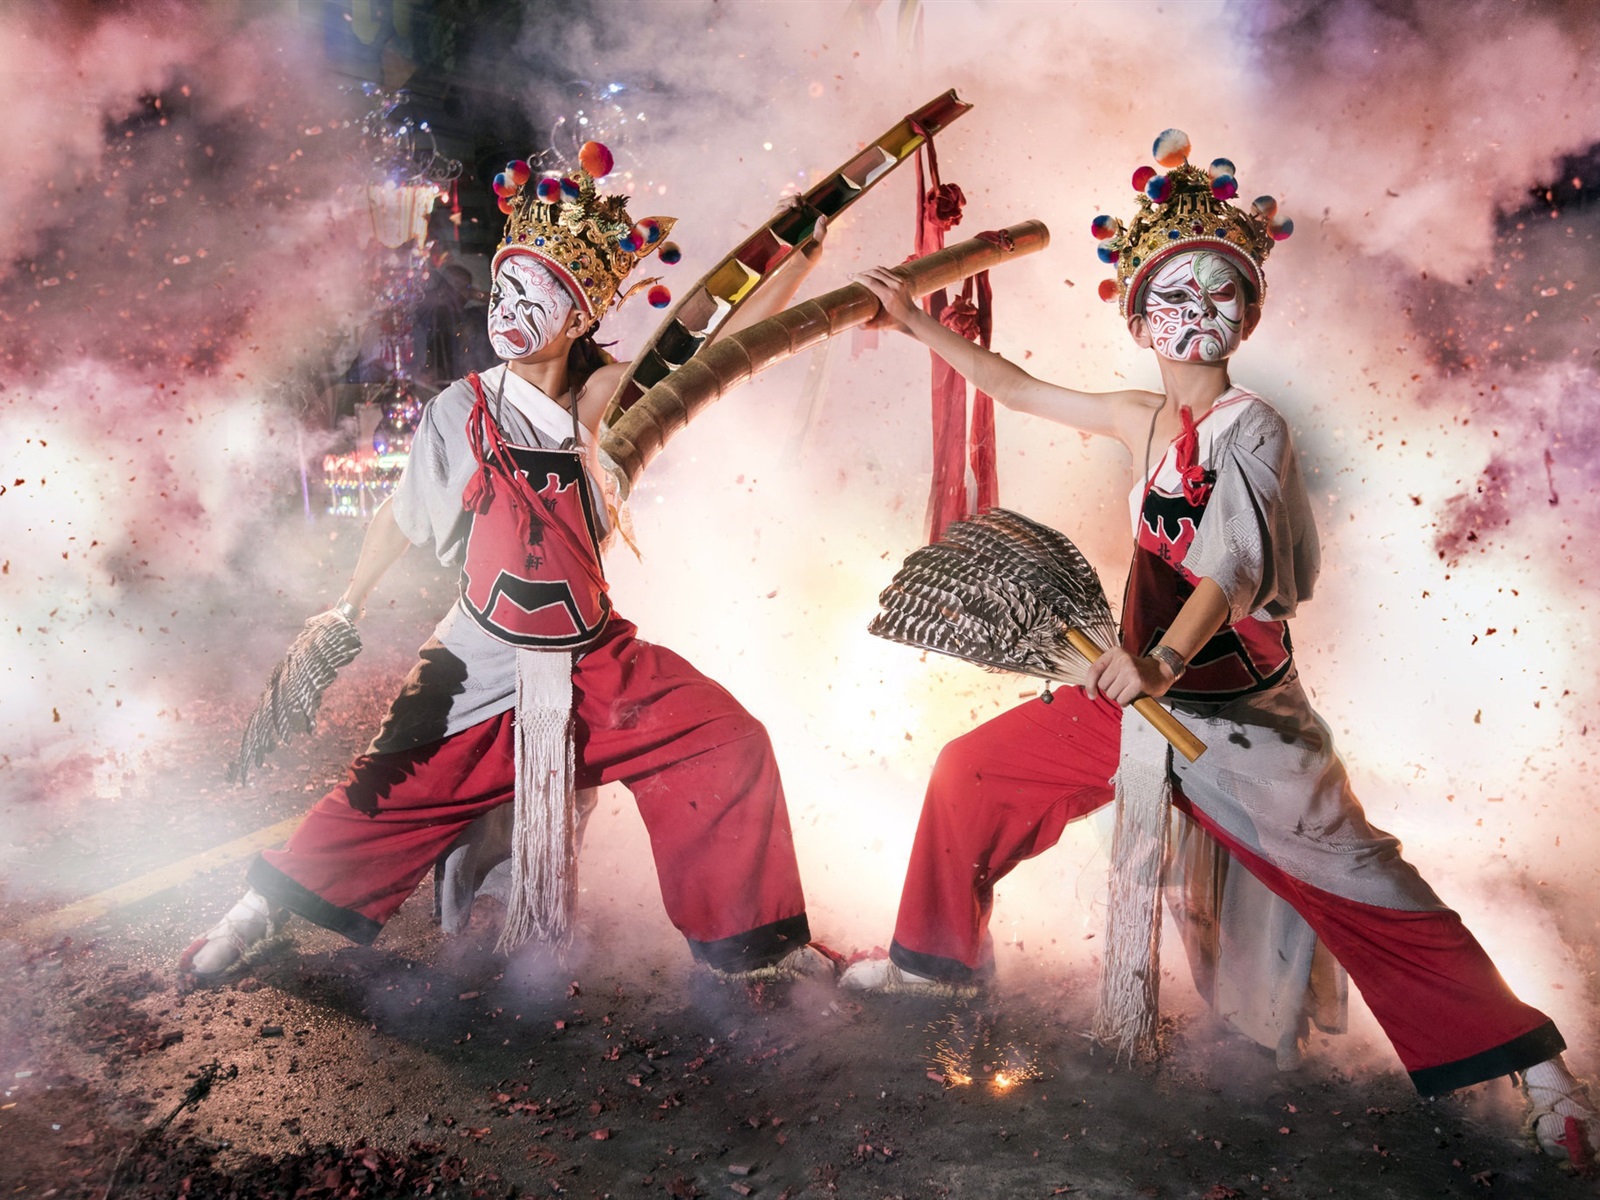 Wallpaper Chinese culture, dance, mask, firecracker 1920x1200 HD Picture, Image